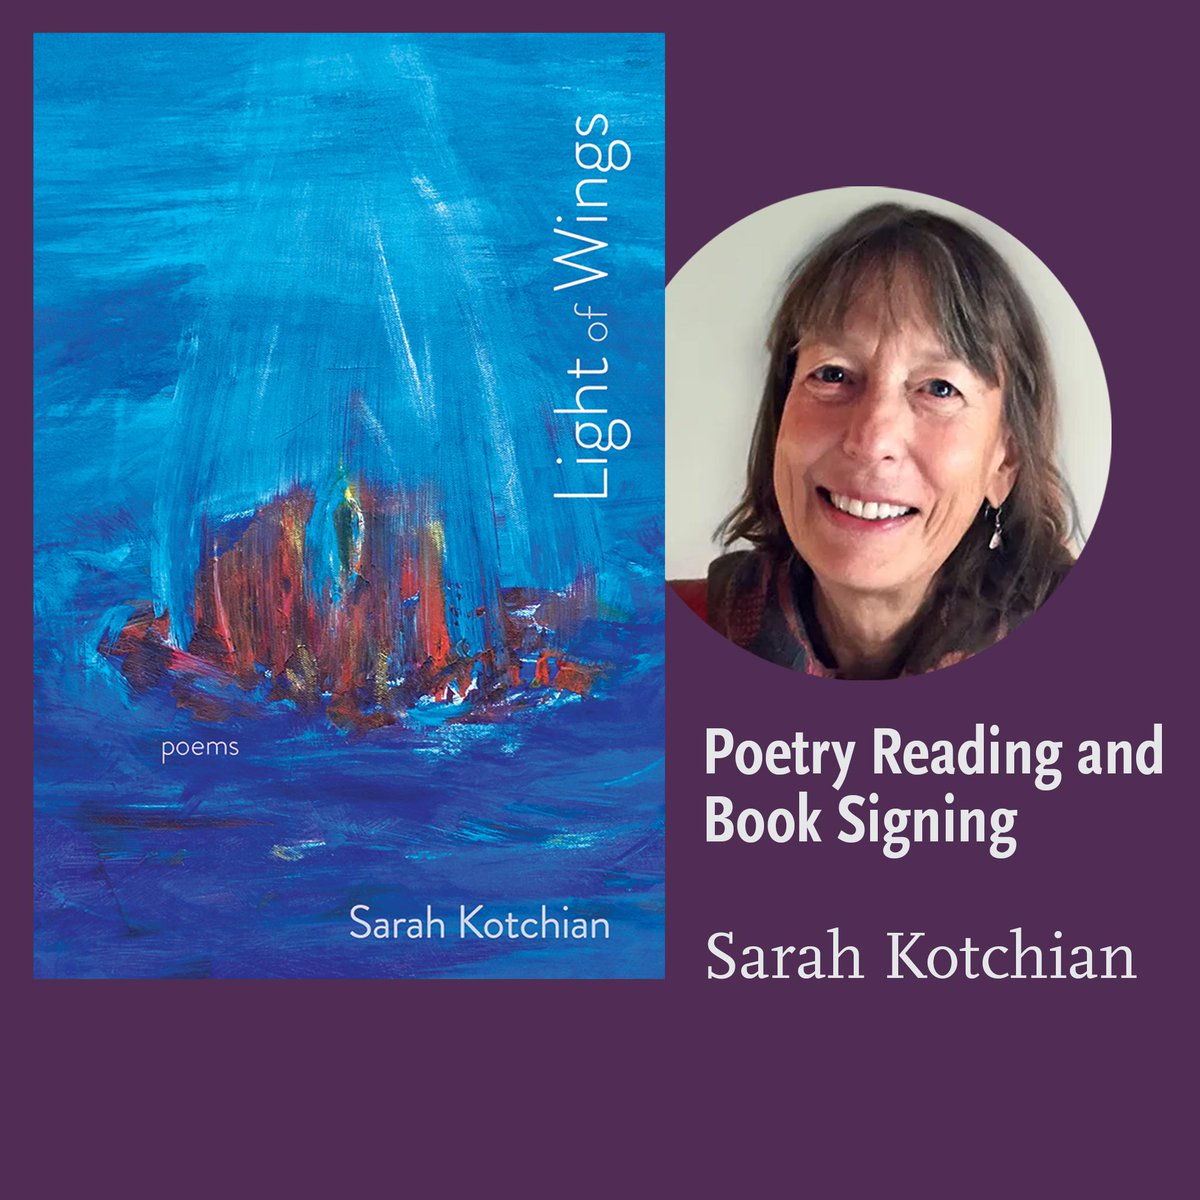 Join us 3/10, 6 pm, at @bookworksabq for the launch of Sarah Kotchian's new book, Light of Wings! Sarah will read from her haunting poetry, which merges spirit and nature in a voice both elegiac and celebratory. Experience this beautiful work first-hand. #sarahkotchian #poetry